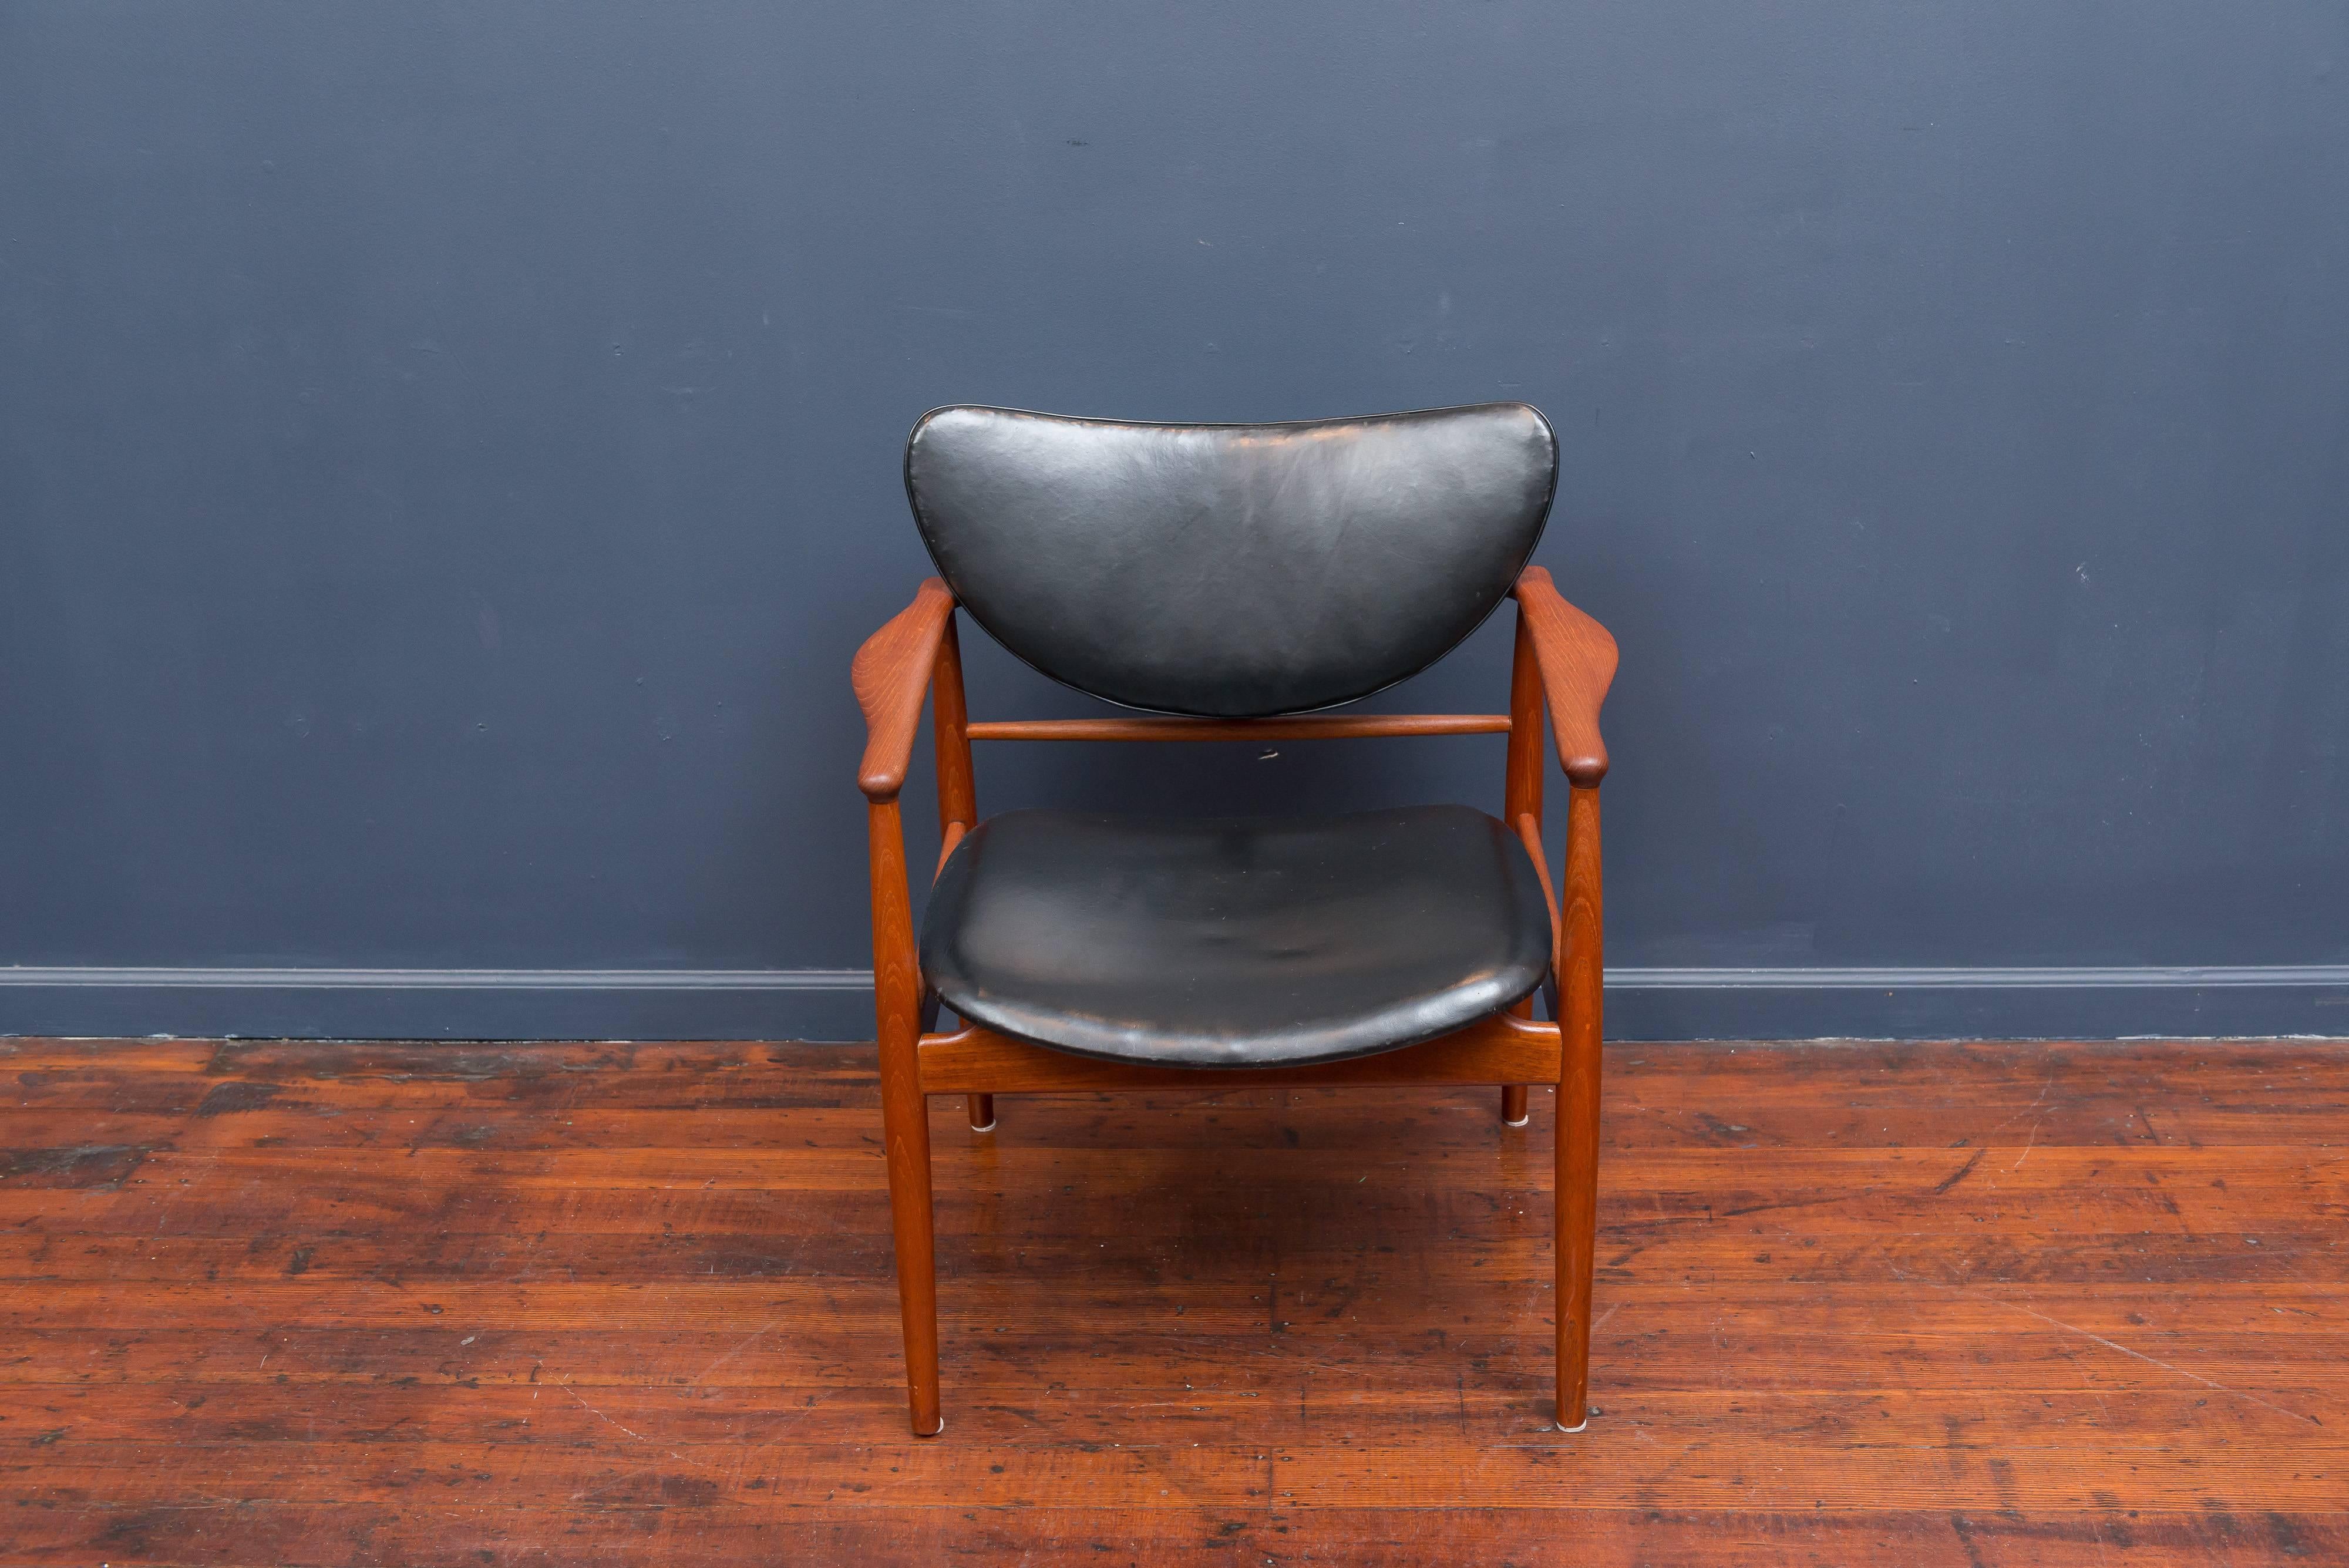 Finn Juhl model NV 48 armchair for Niels Vodder, with embossed maker's stamp to the rear stretcher. Good condition black leather upholstery with a refinished teak wood frame, three dots or dowels appear on one back side stretchers. 